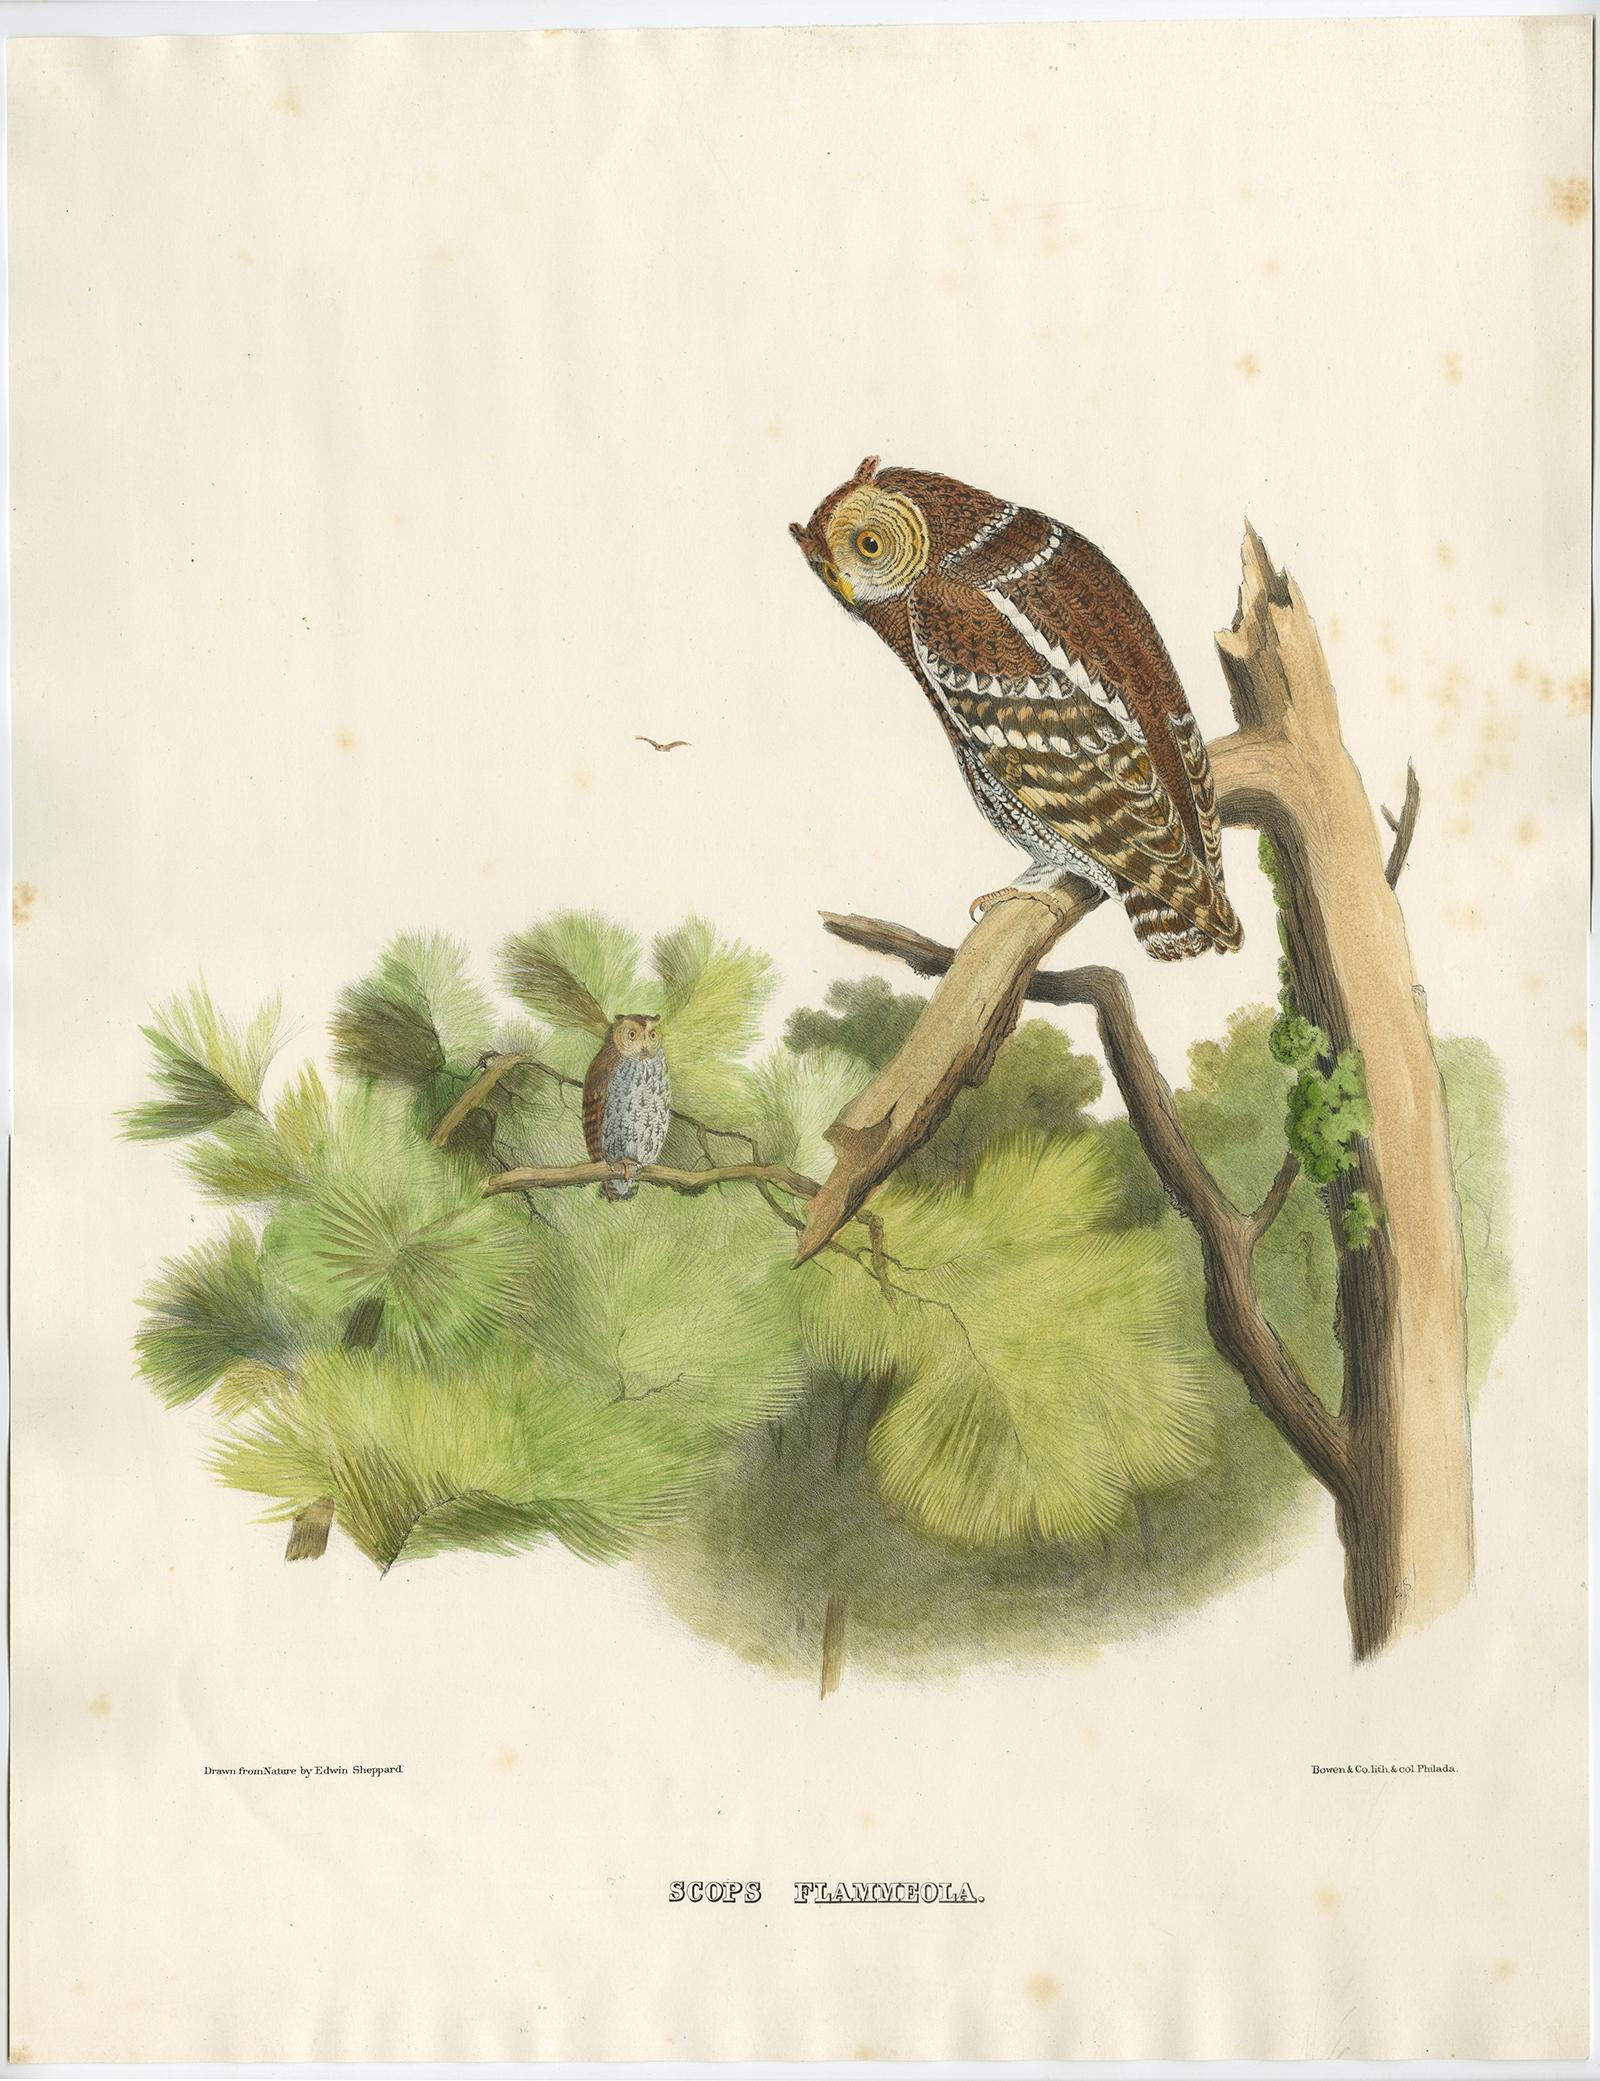 Antique print, titled: 'Scops Flammeola.' - Rare antique print showing the flammulated owl (Psiloscops flammeolus).

This attractive and rare print originates from the sumptuous work 'The new and heretofore unfigured species of the birds of North